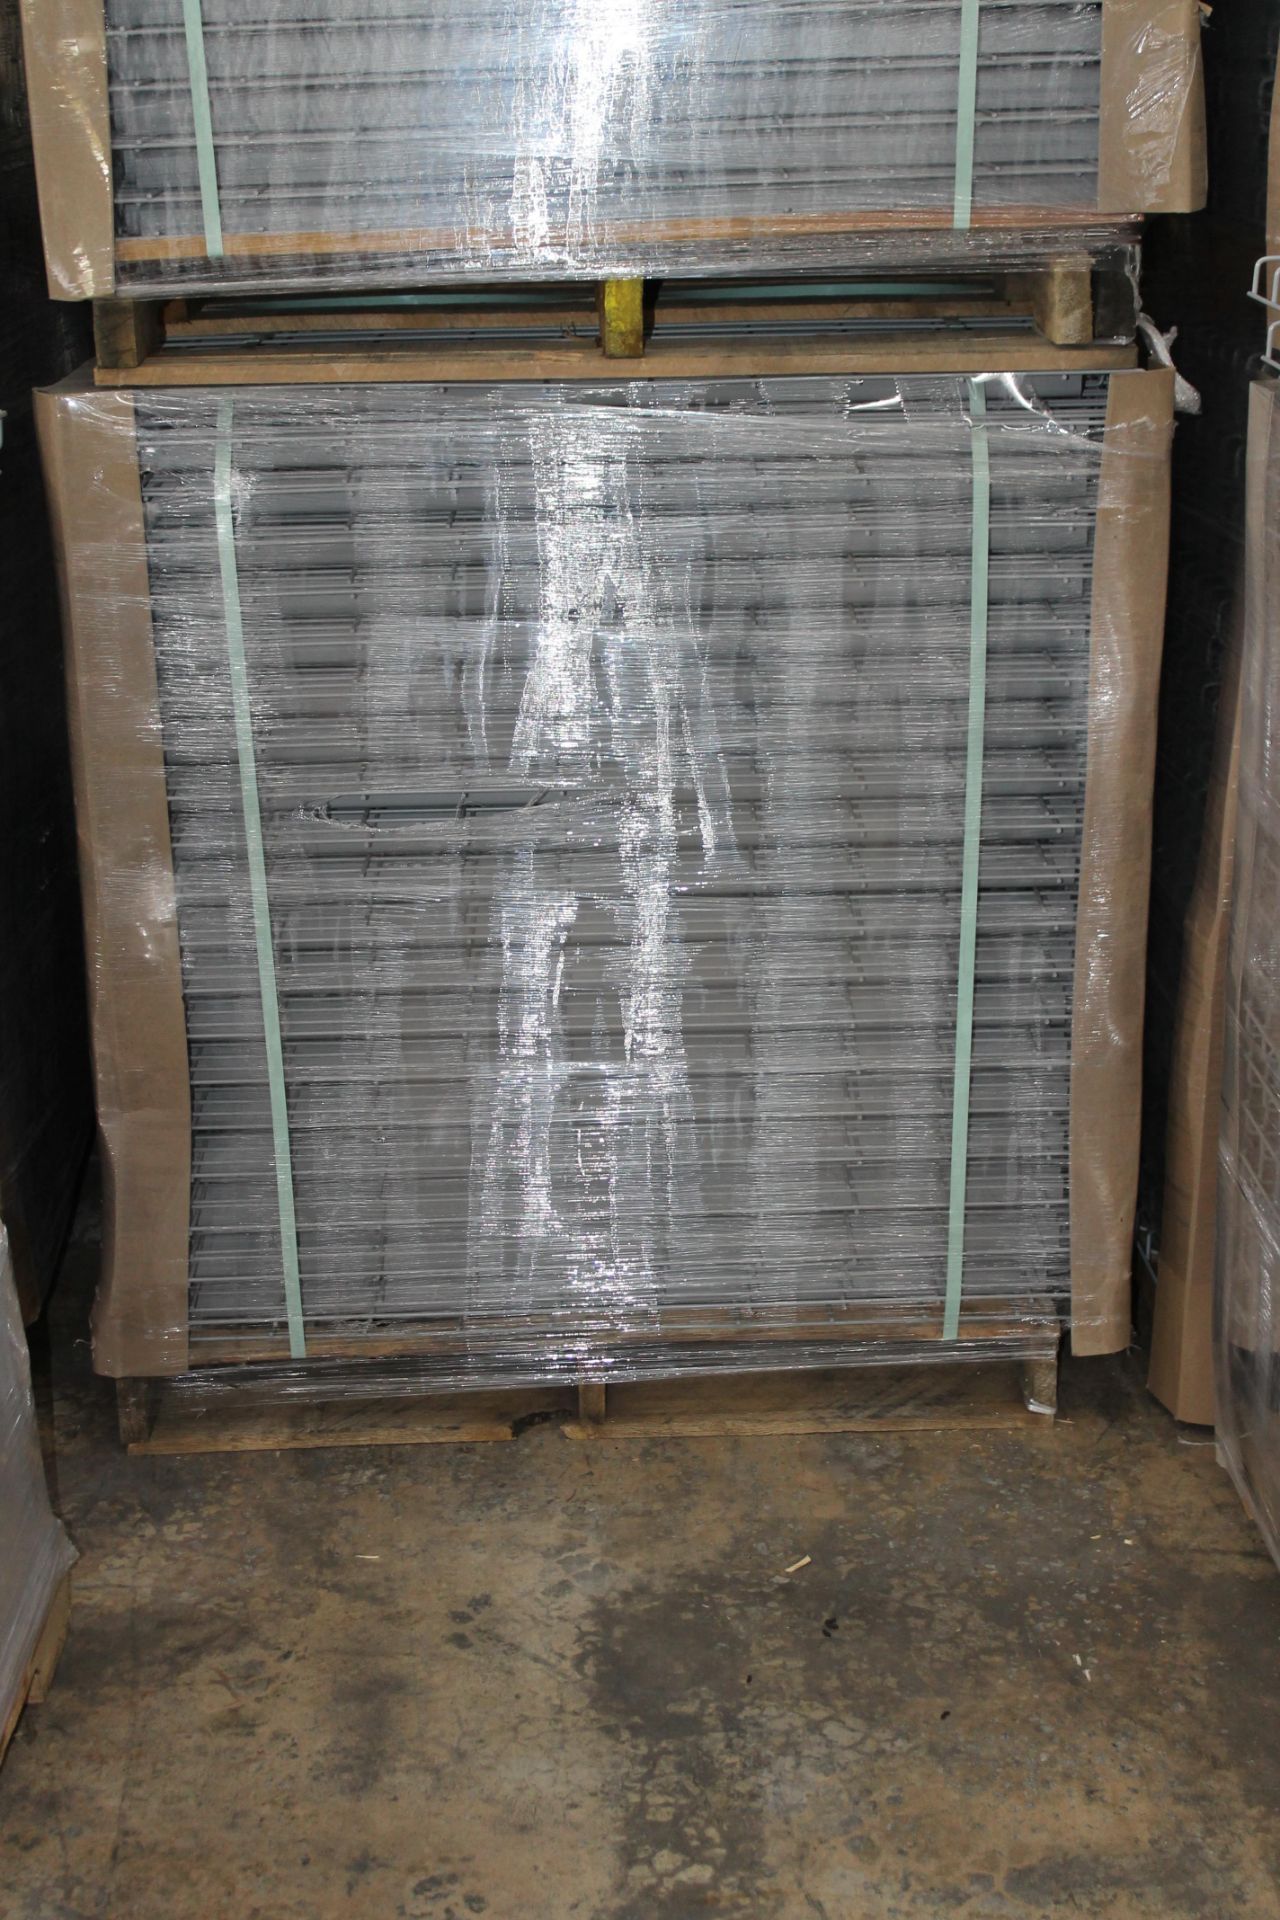 NEW 40 PCS OF STANDRD 42" X 46" WIREDECK - 2200 LBS CAPACITY